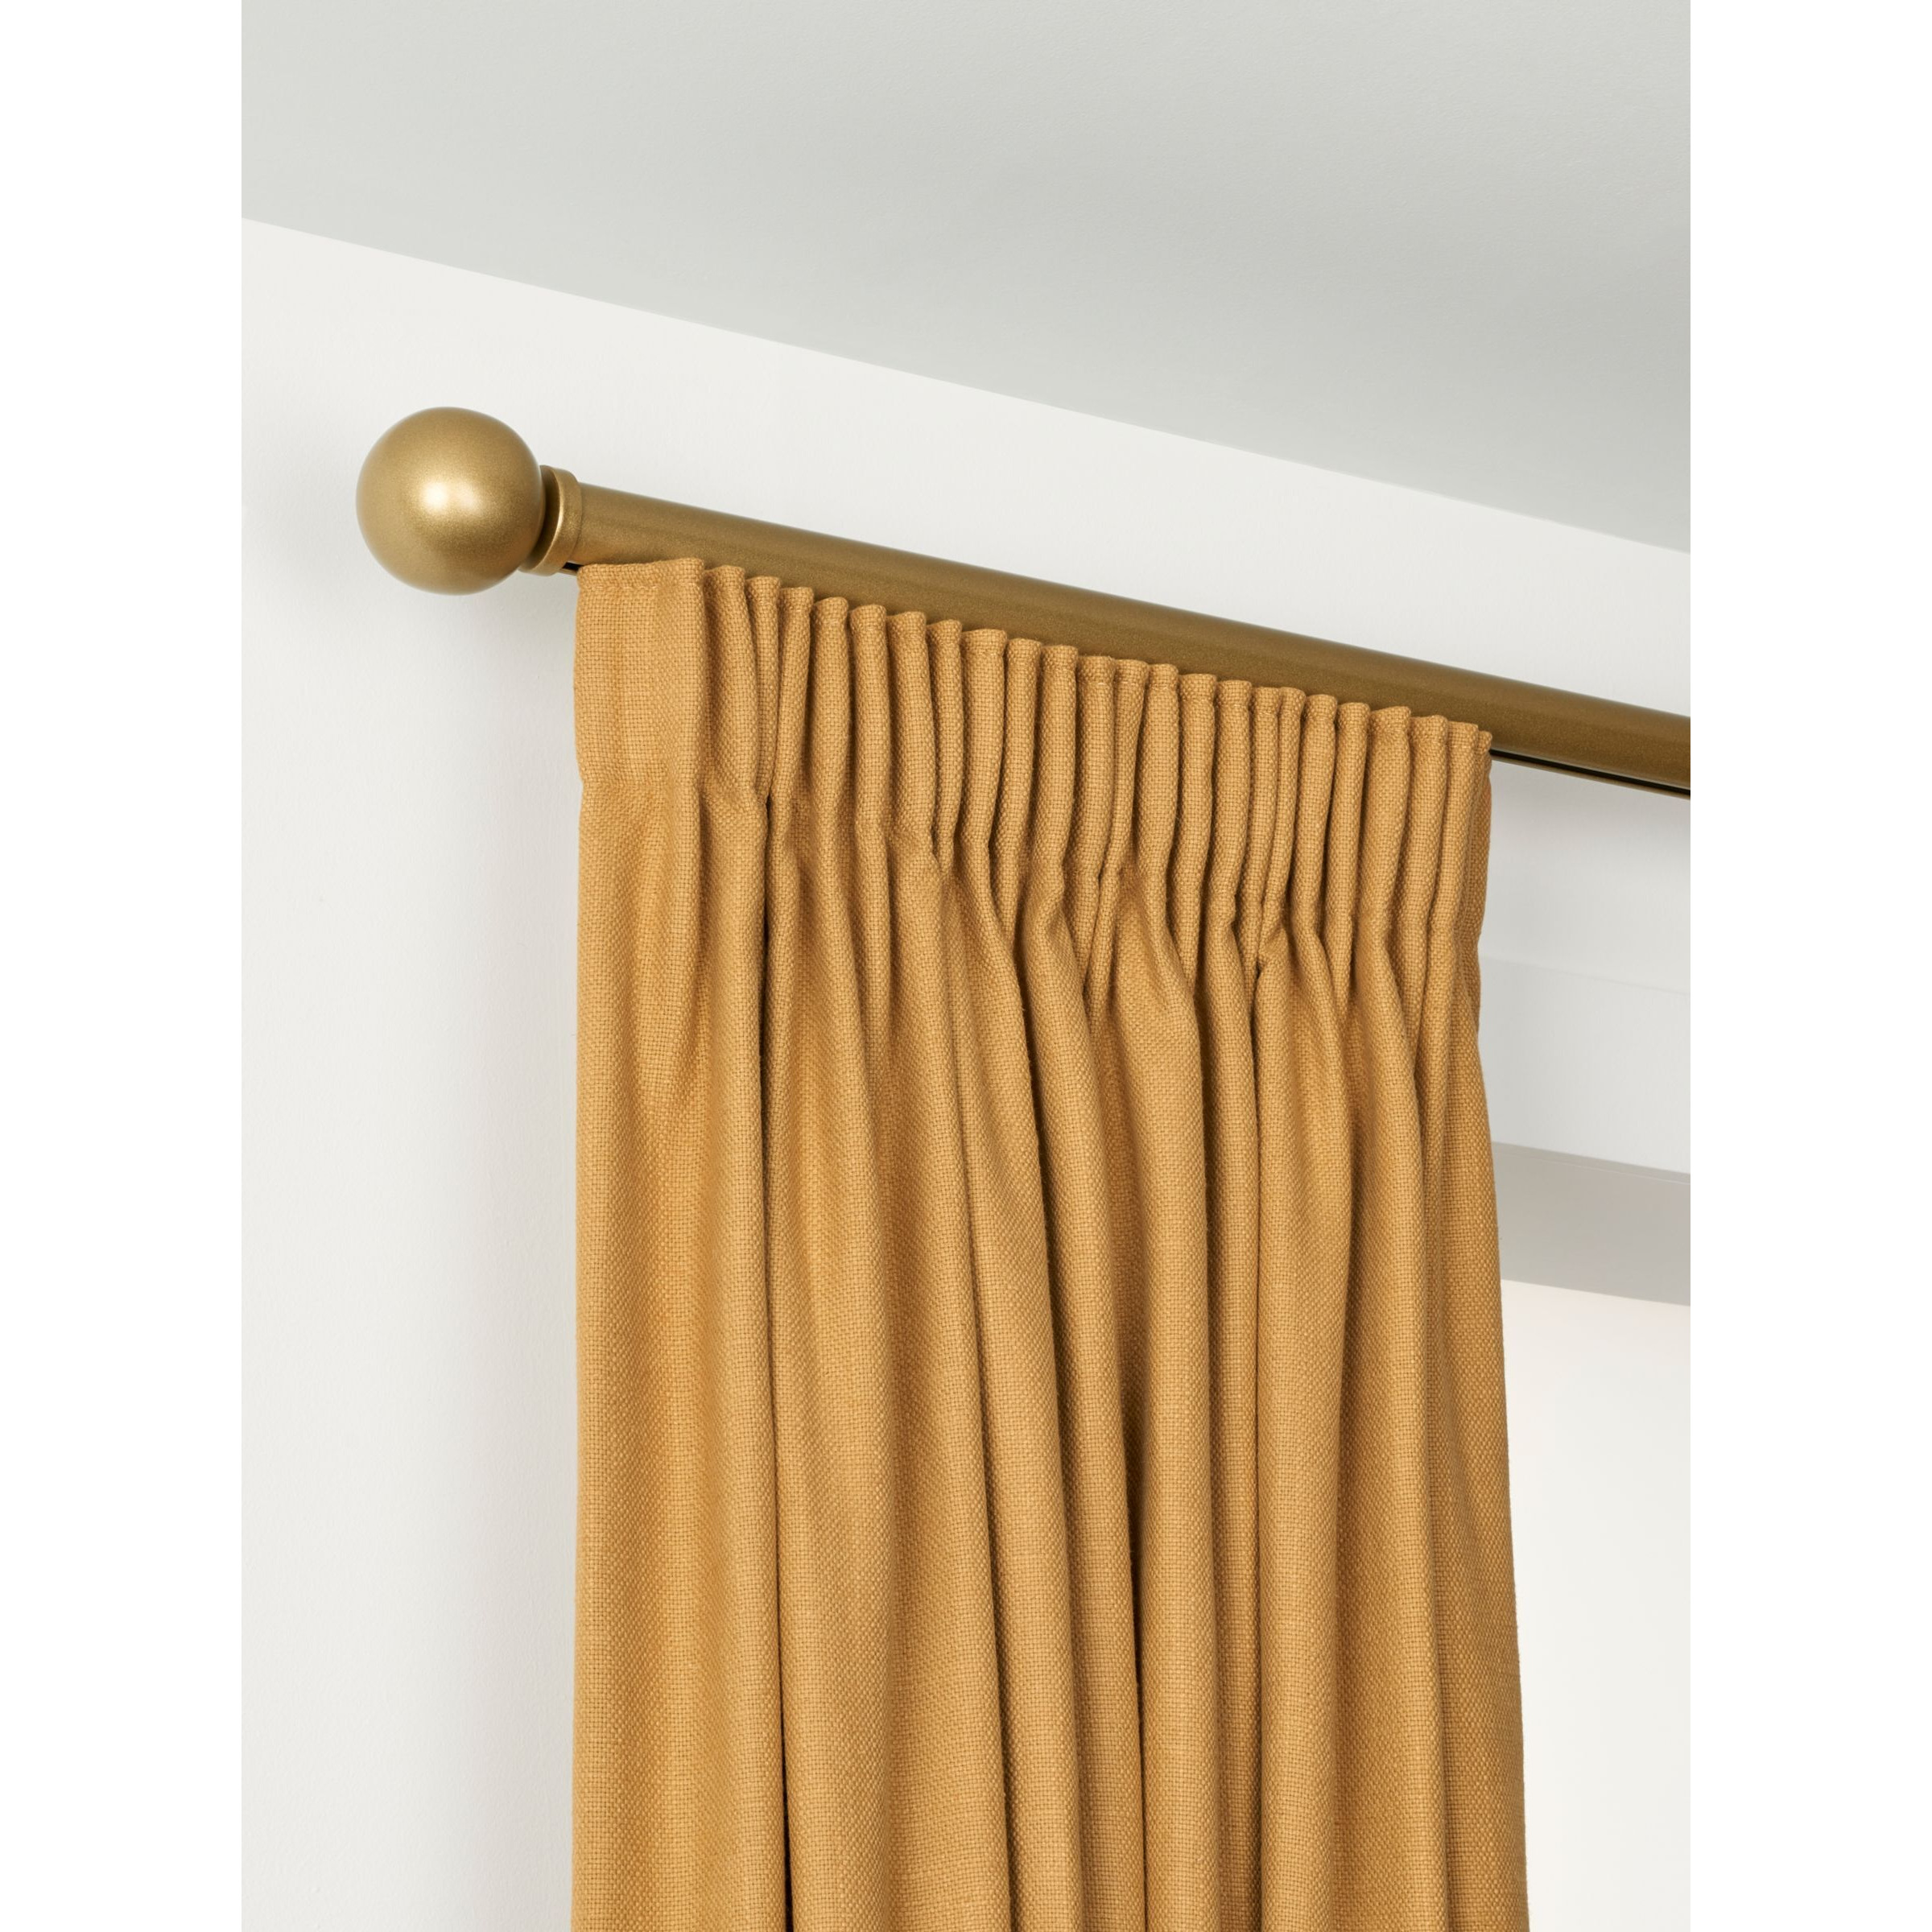 John Lewis Select Gliding Curtain Pole with Ball Finial, Wall Fix, Dia.30mm - image 1